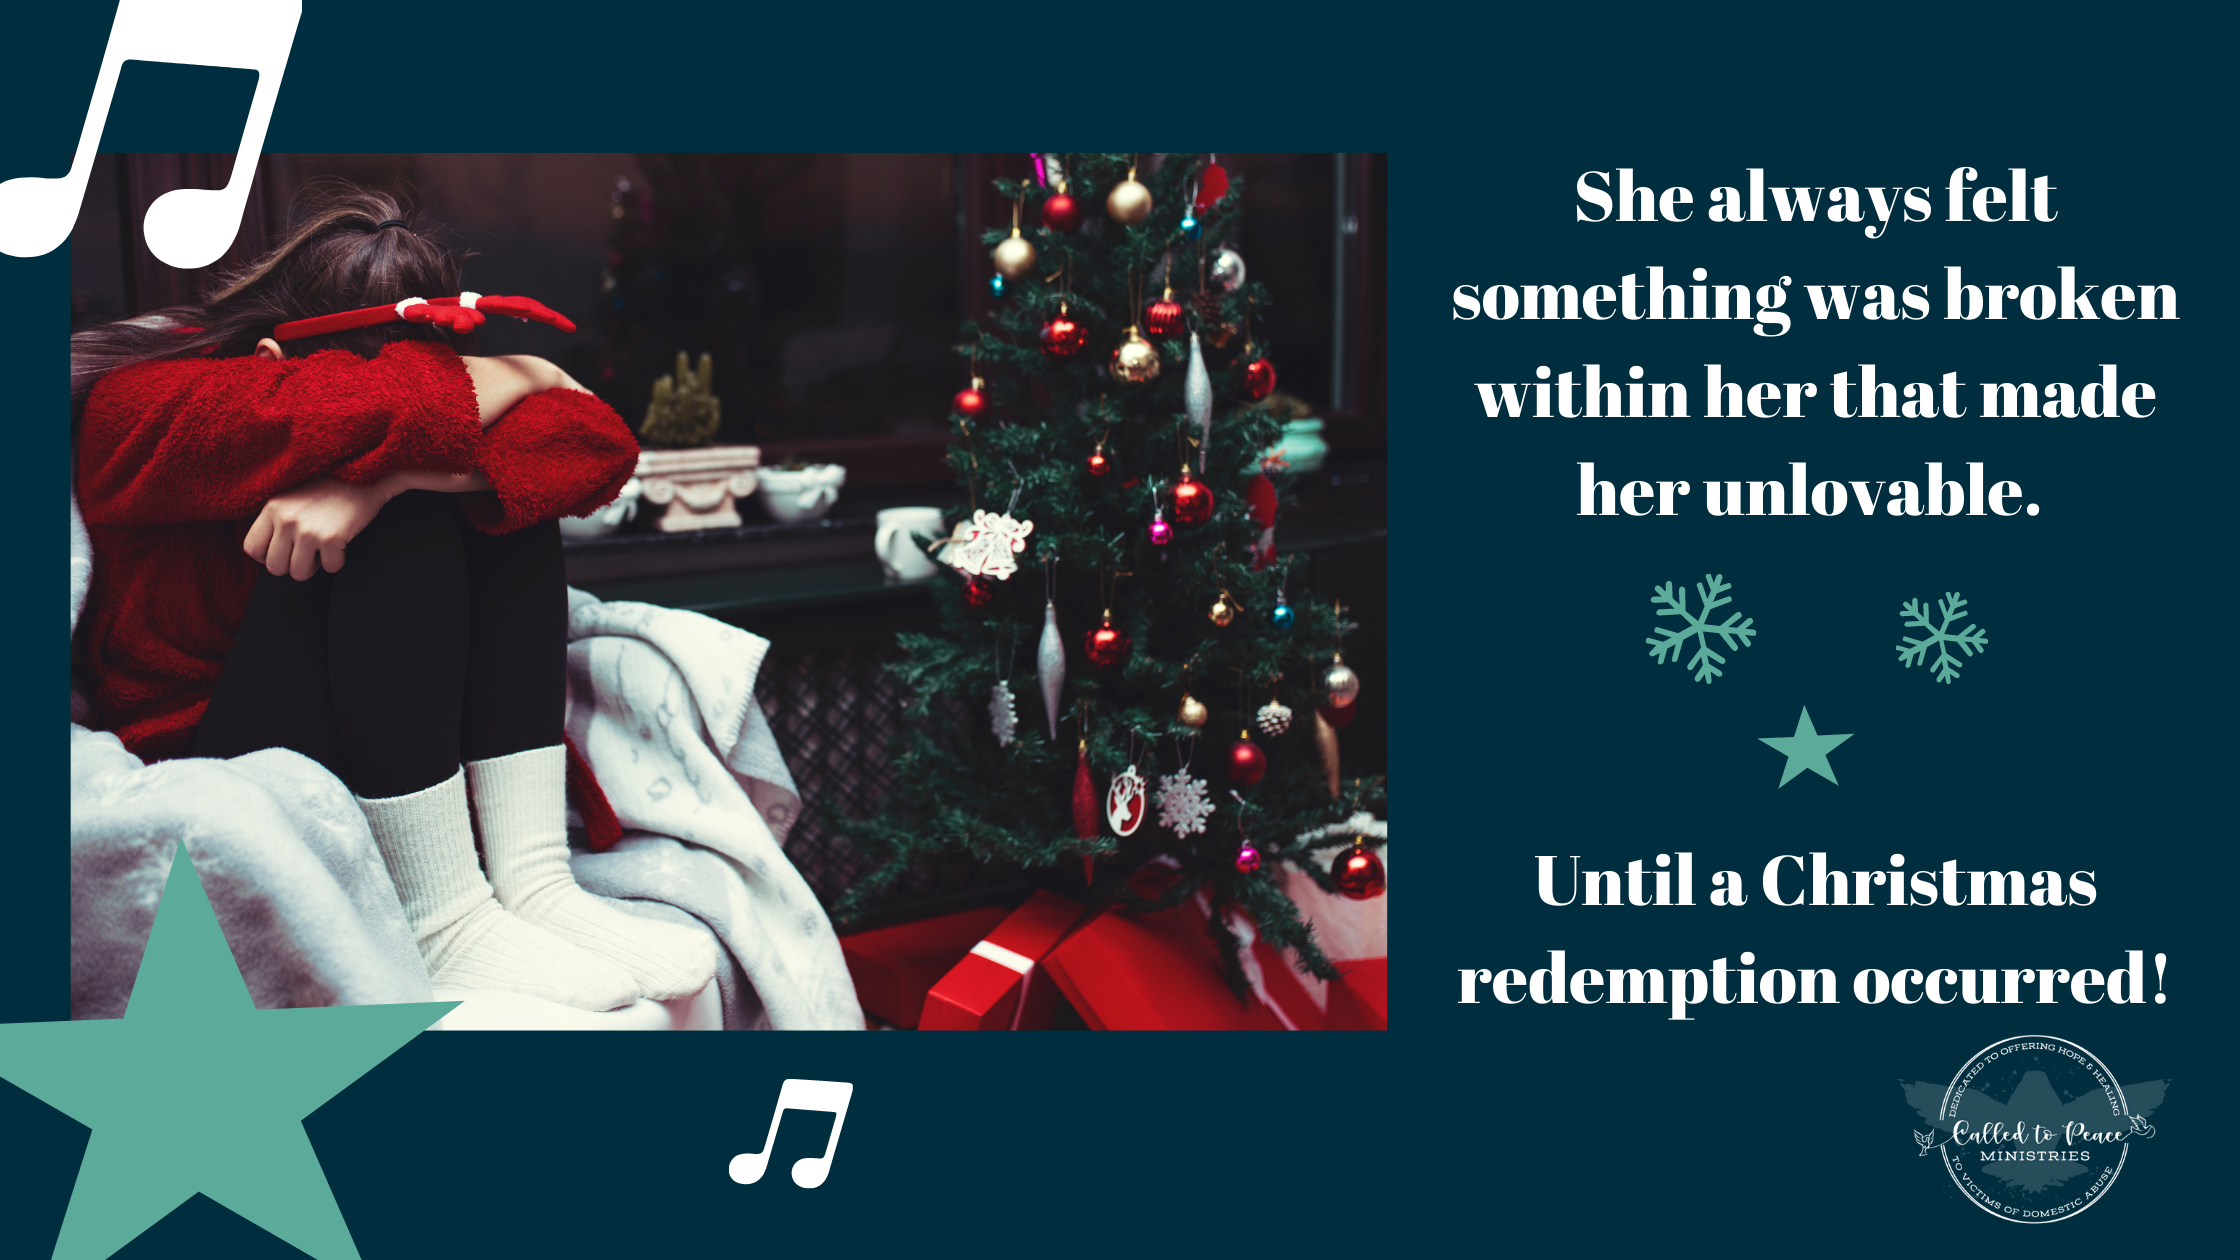 Meet Kristen – Christmas Holidays, a Domestic Abuse Rescue, and a New Song of Redemption!